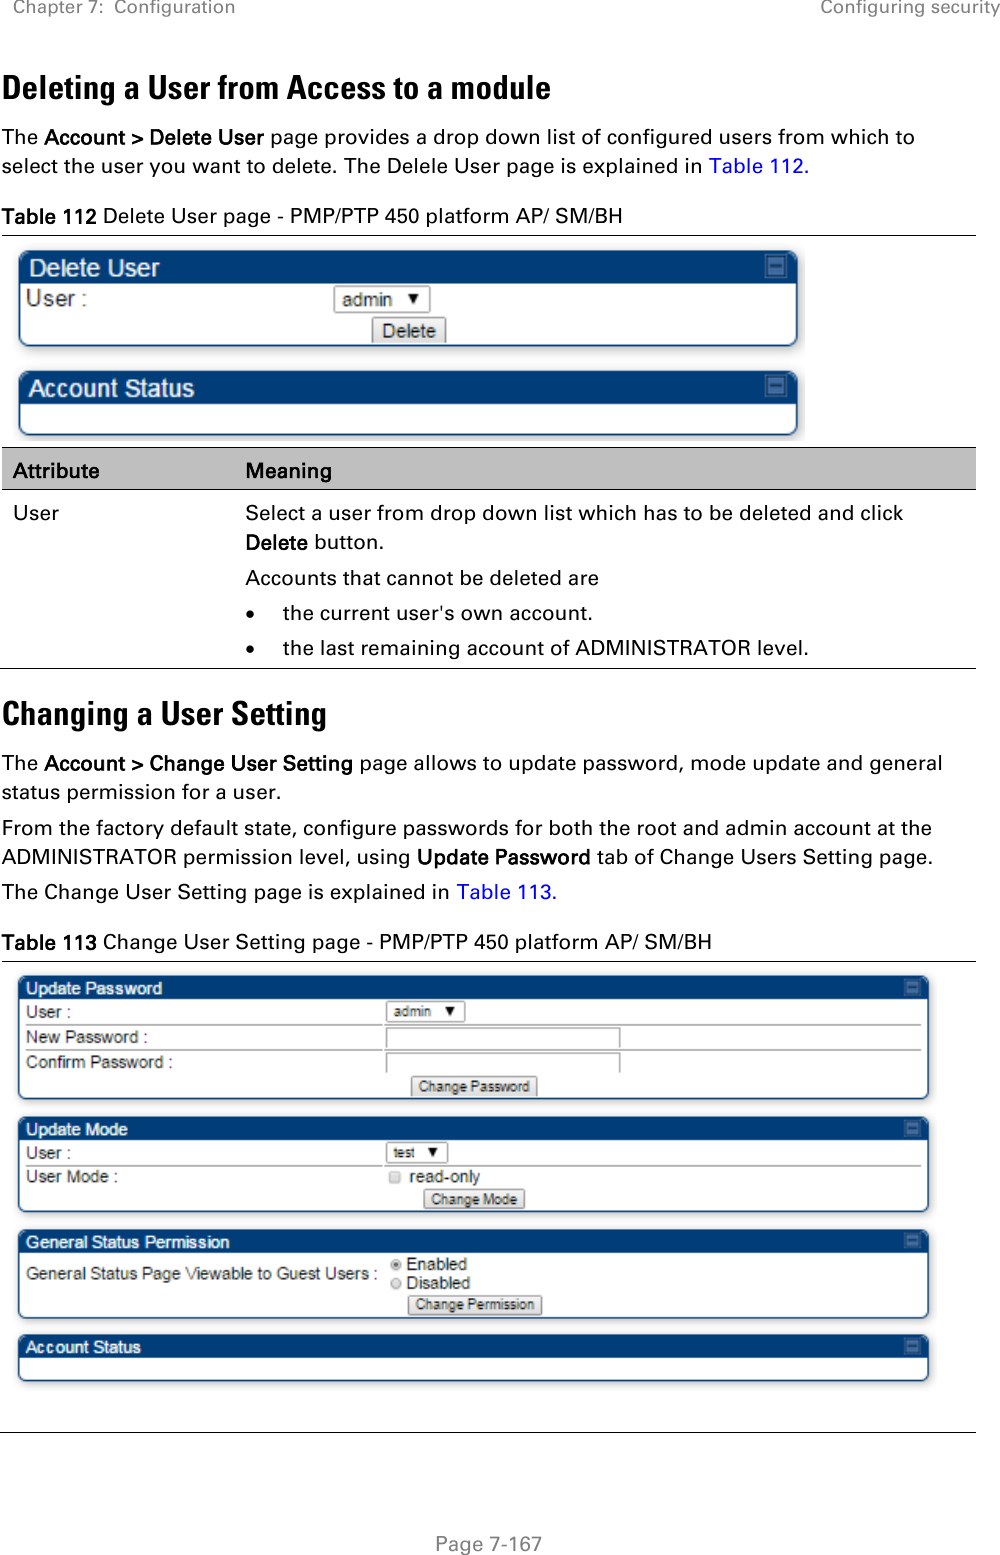 Chapter 7:  Configuration Configuring security   Page 7-167 Deleting a User from Access to a module The Account &gt; Delete User page provides a drop down list of configured users from which to select the user you want to delete. The Delele User page is explained in Table 112. Table 112 Delete User page - PMP/PTP 450 platform AP/ SM/BH  Attribute Meaning User Select a user from drop down list which has to be deleted and click Delete button. Accounts that cannot be deleted are  the current user&apos;s own account.  the last remaining account of ADMINISTRATOR level. Changing a User Setting The Account &gt; Change User Setting page allows to update password, mode update and general status permission for a user.  From the factory default state, configure passwords for both the root and admin account at the ADMINISTRATOR permission level, using Update Password tab of Change Users Setting page.  The Change User Setting page is explained in Table 113. Table 113 Change User Setting page - PMP/PTP 450 platform AP/ SM/BH   